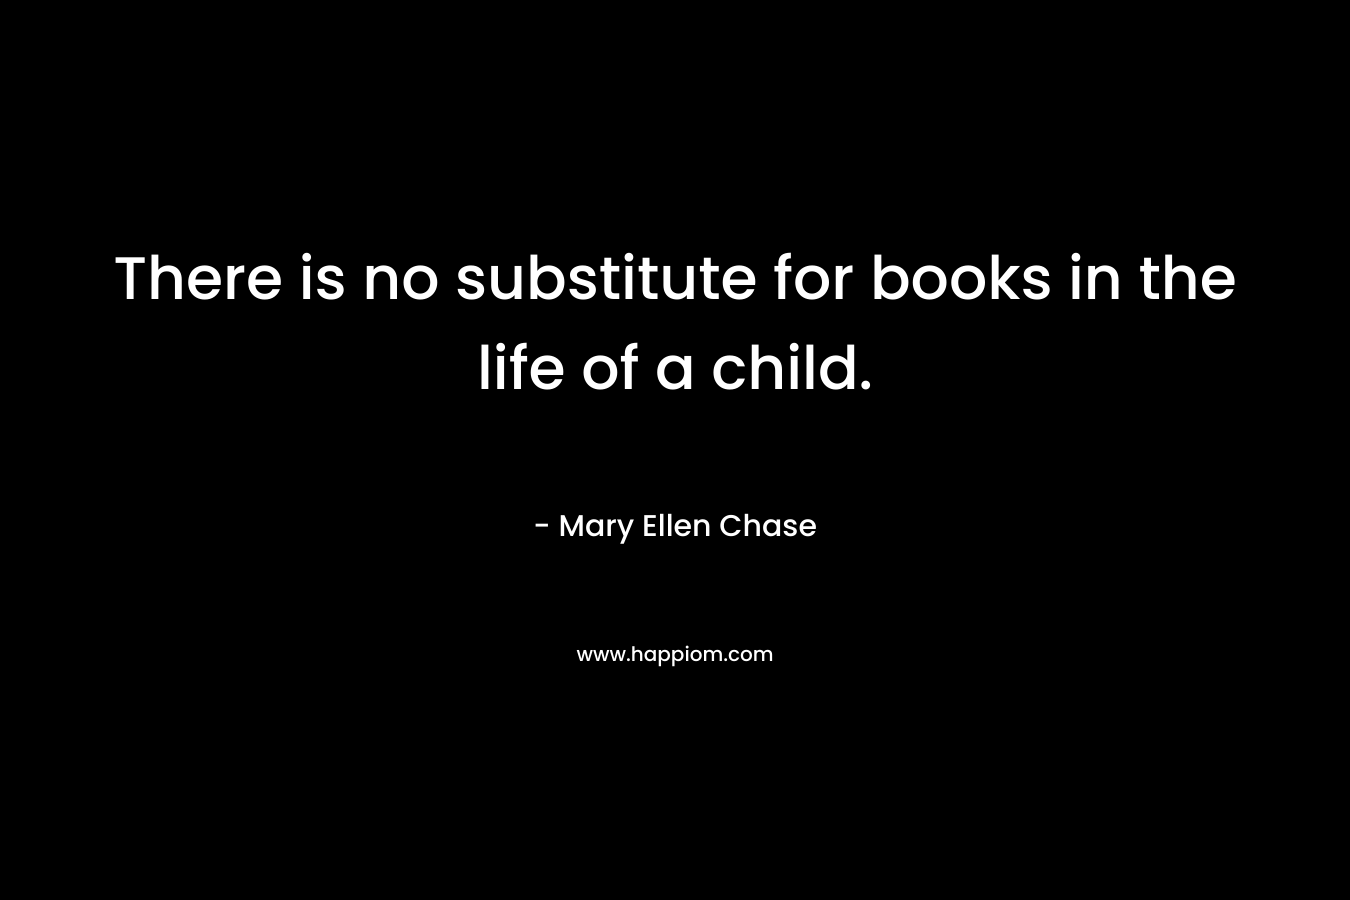 There is no substitute for books in the life of a child. – Mary Ellen Chase